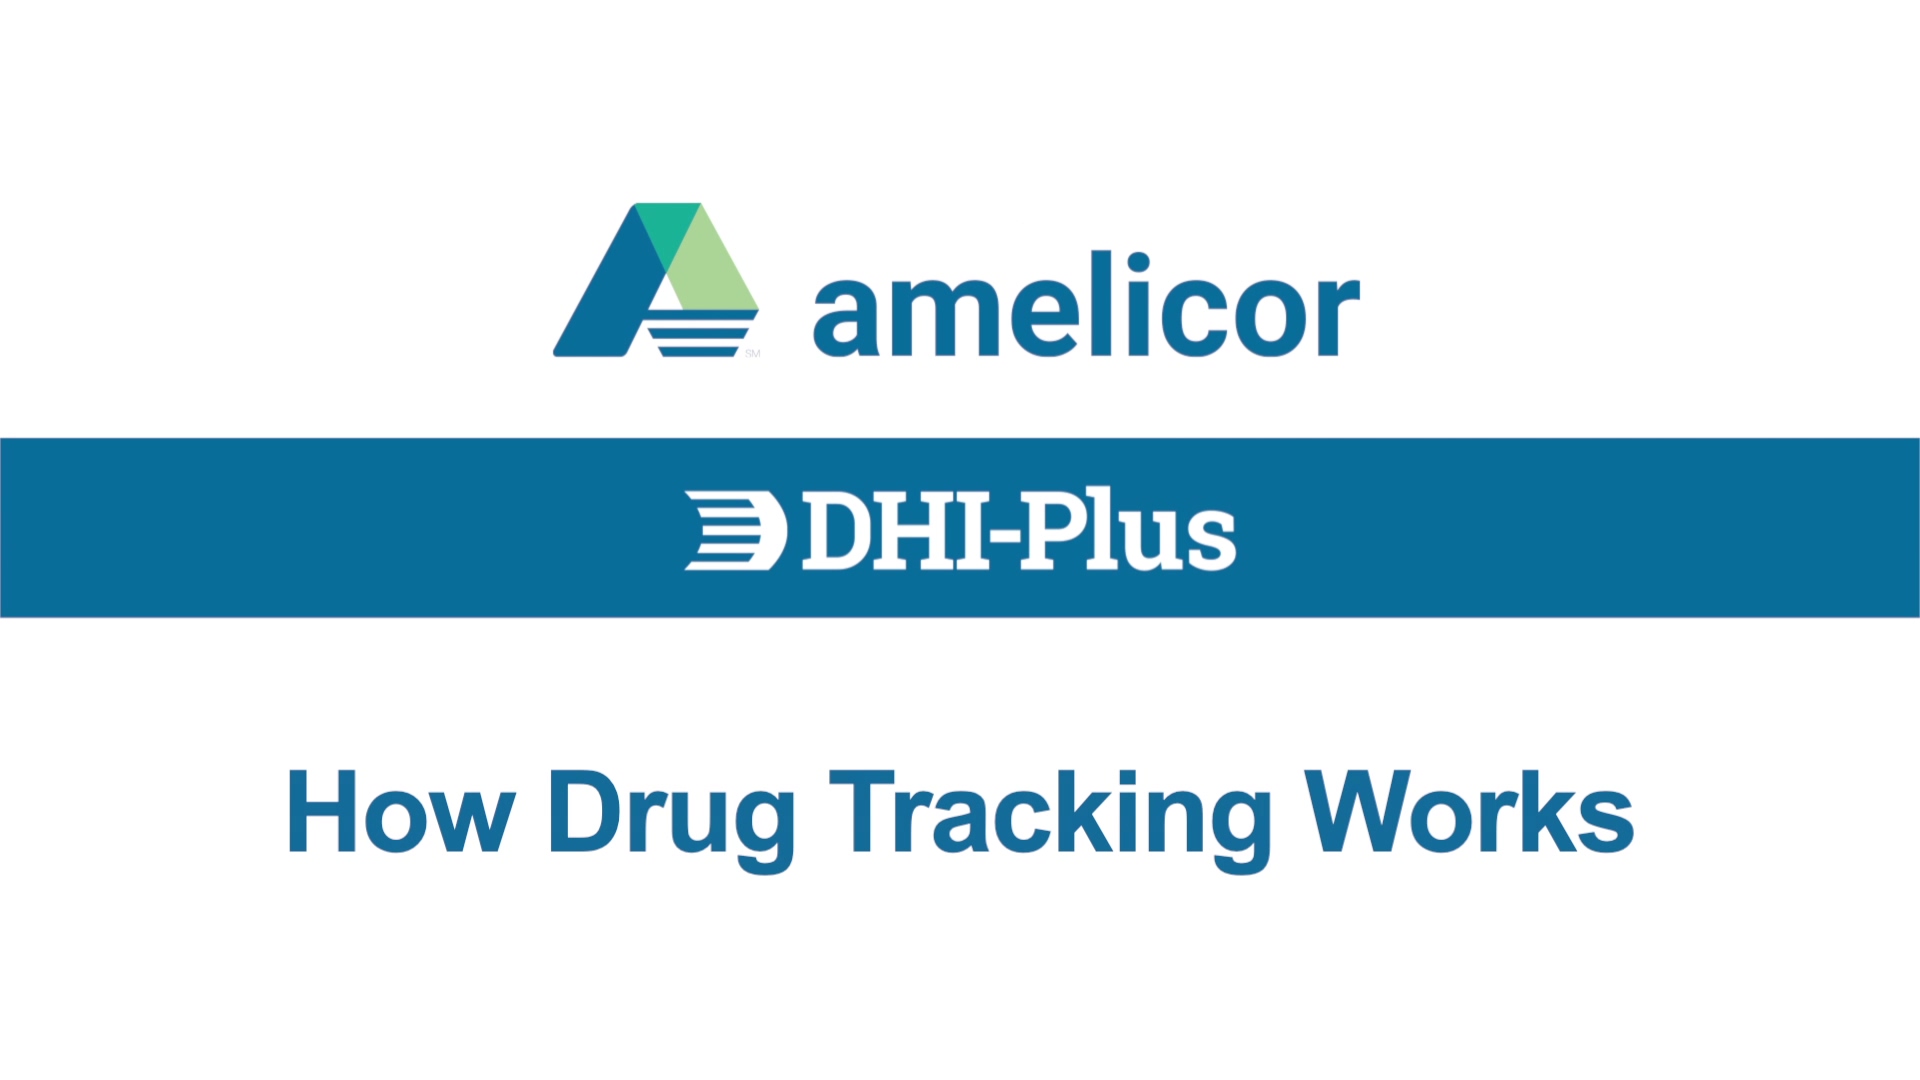 Drug Tracking in DHI-Plus